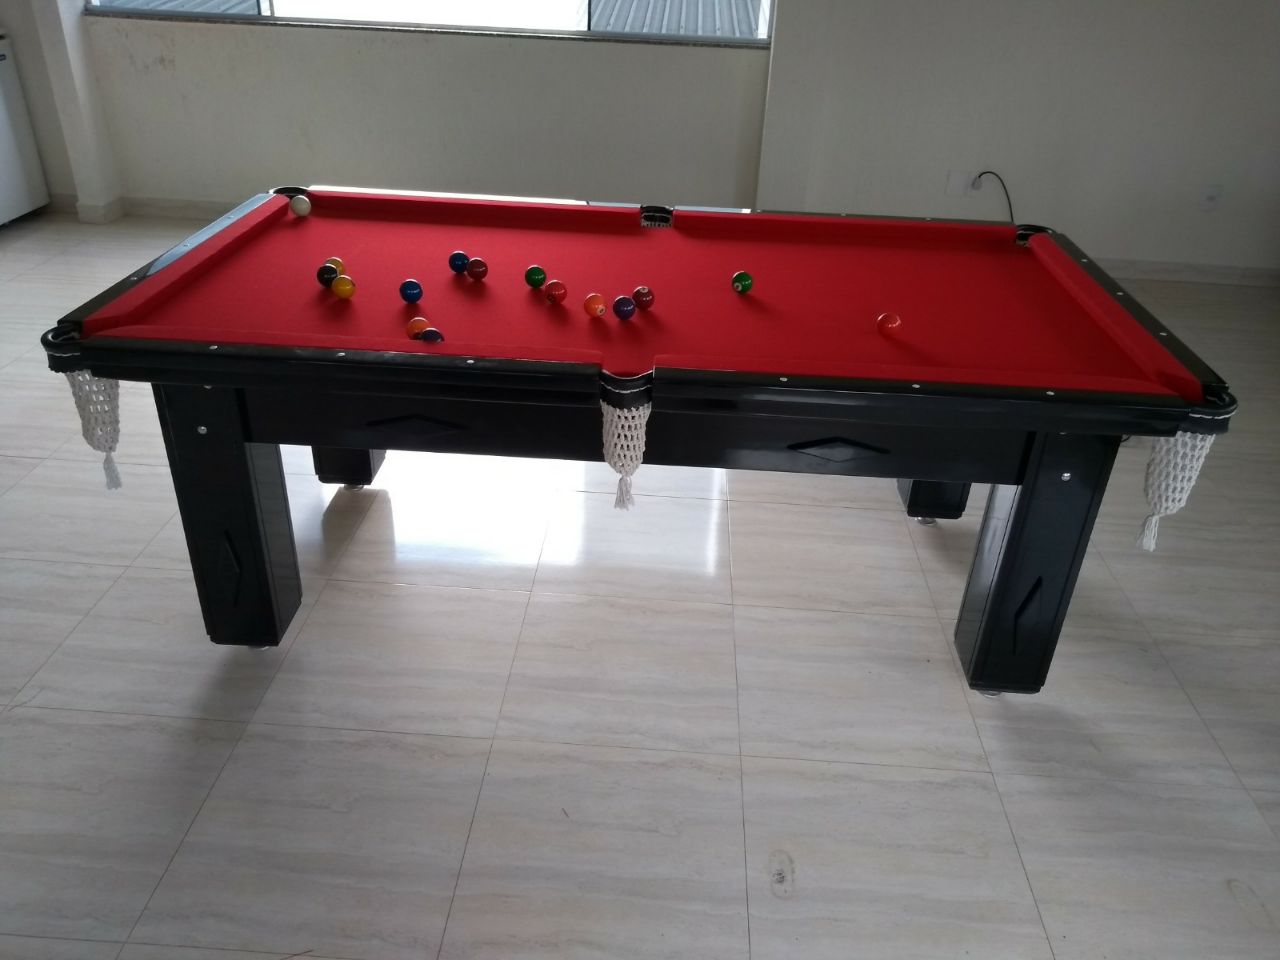 Requested Project - Billiard Table Transportation and Handling Device  |End Day 15 jun 18|